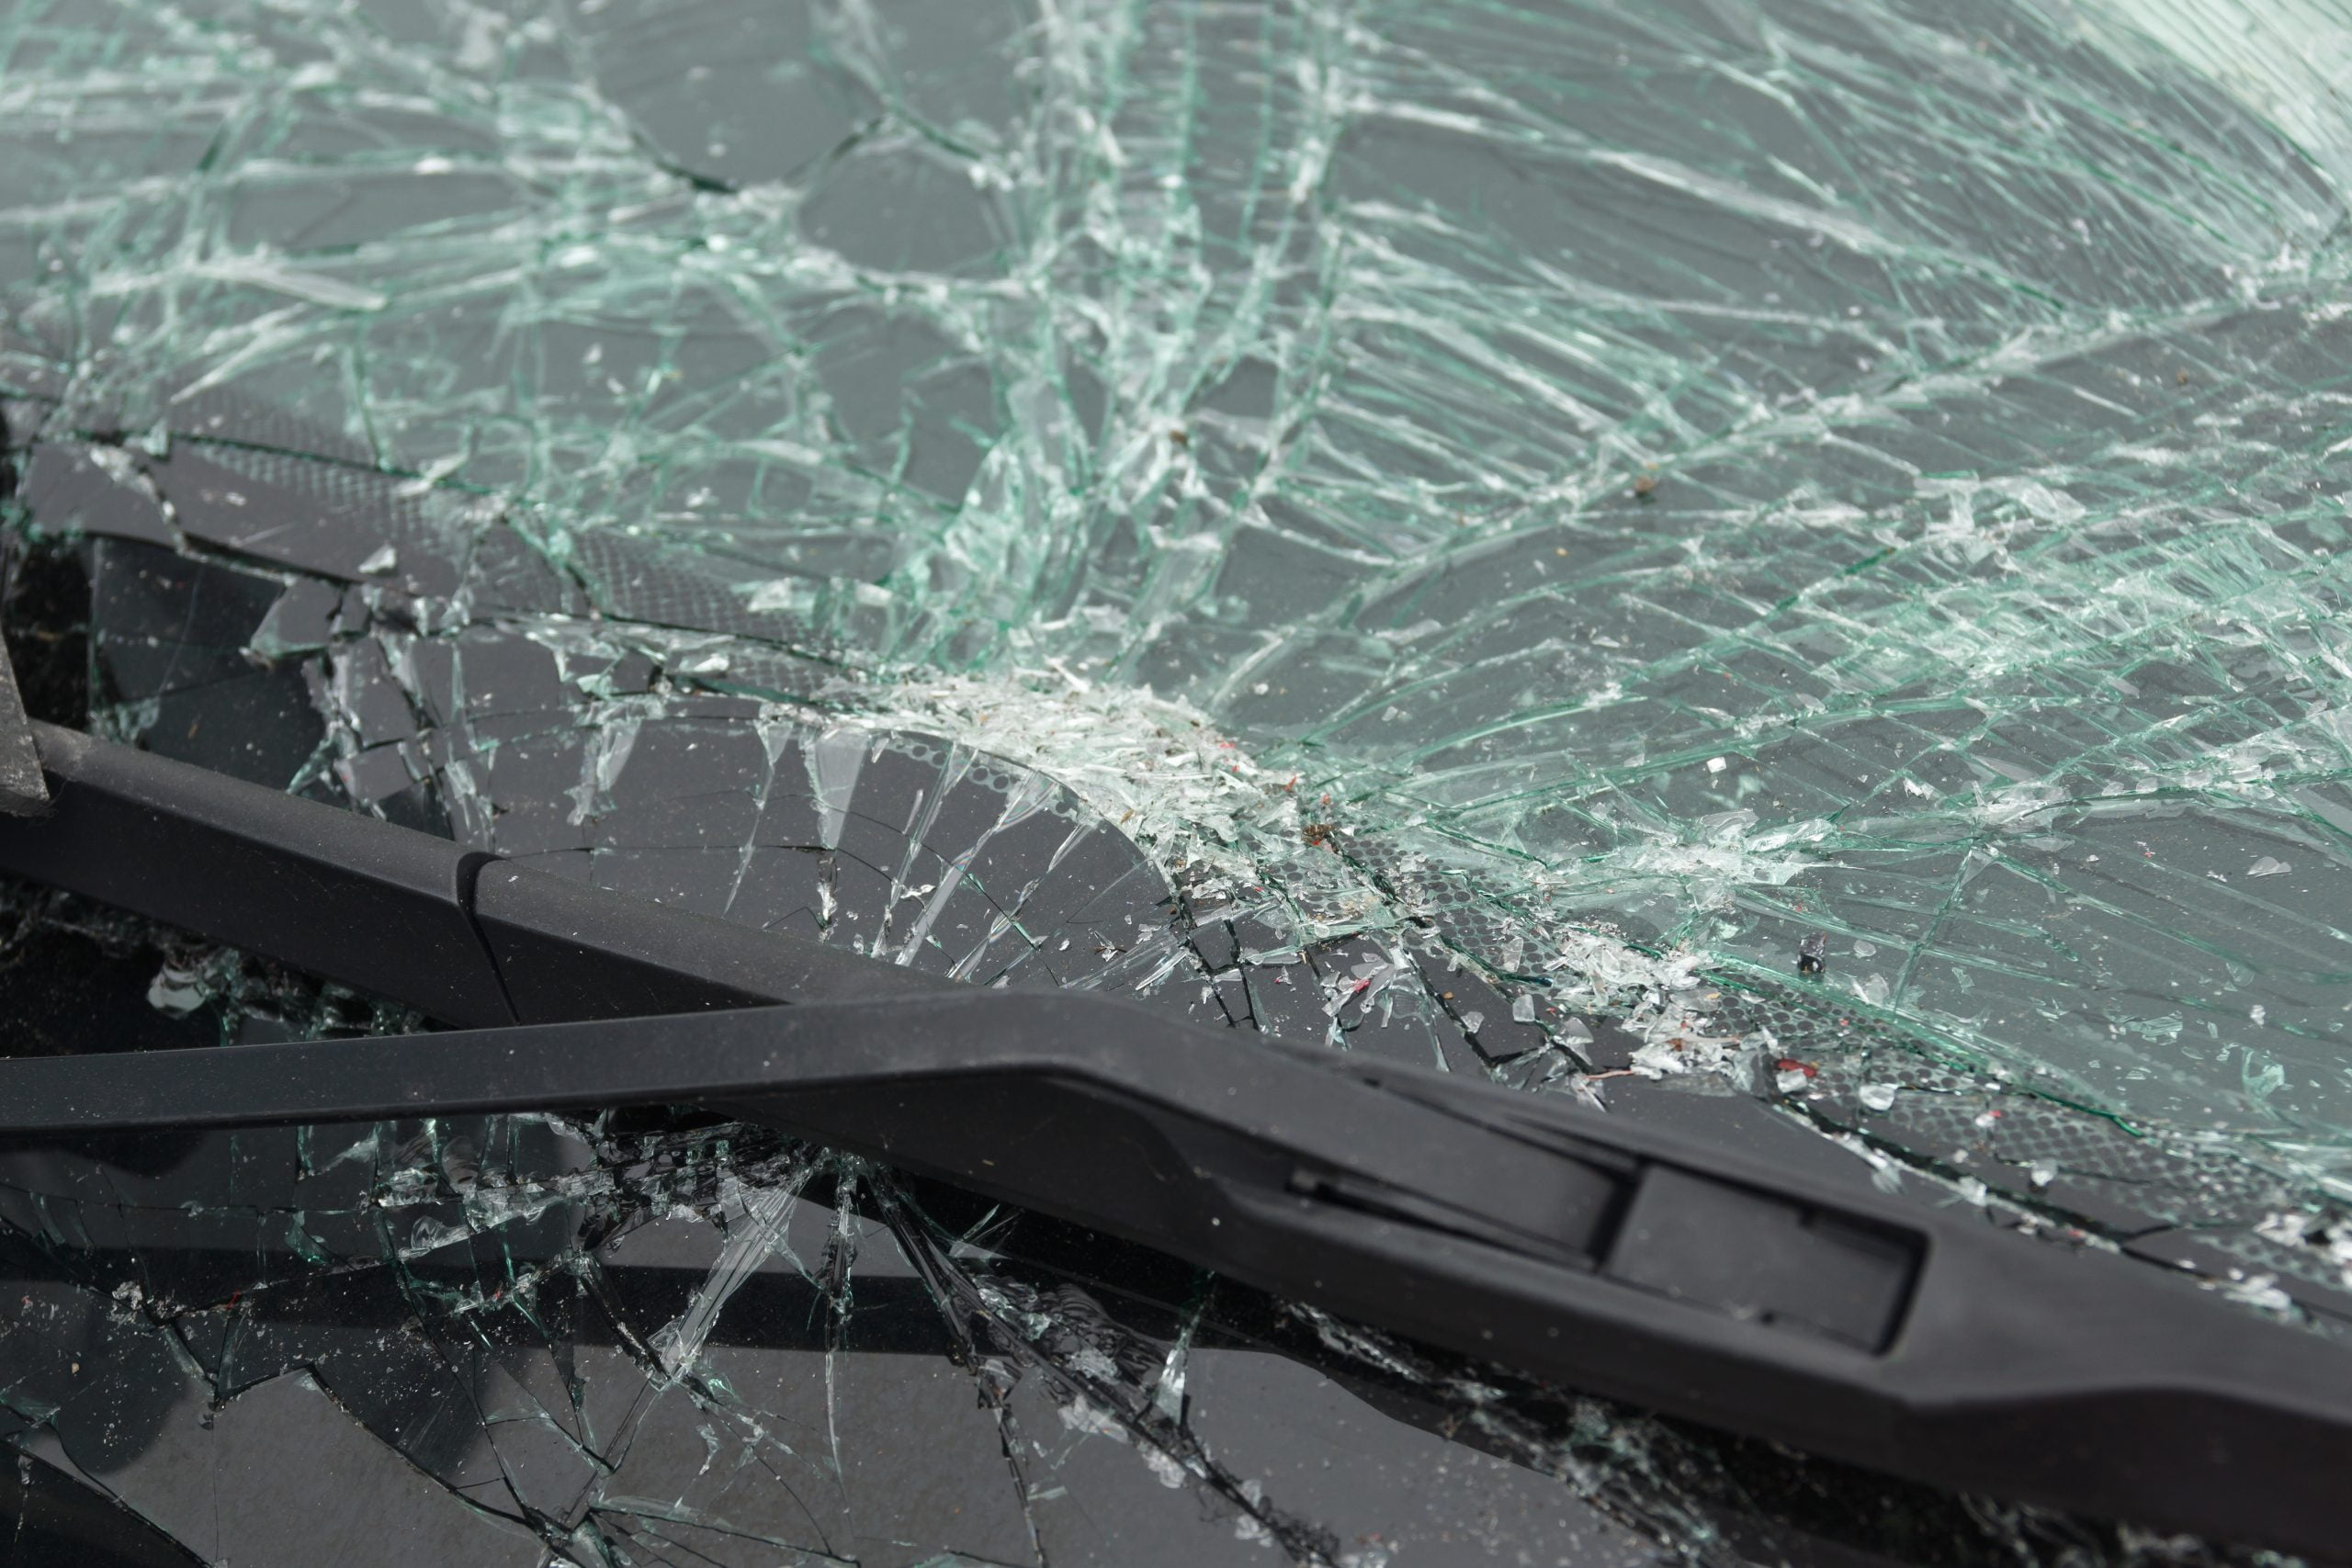 Smashed windscreen or windshield on a car in close up ideal for vehicle insurance claim or vandalism concepts